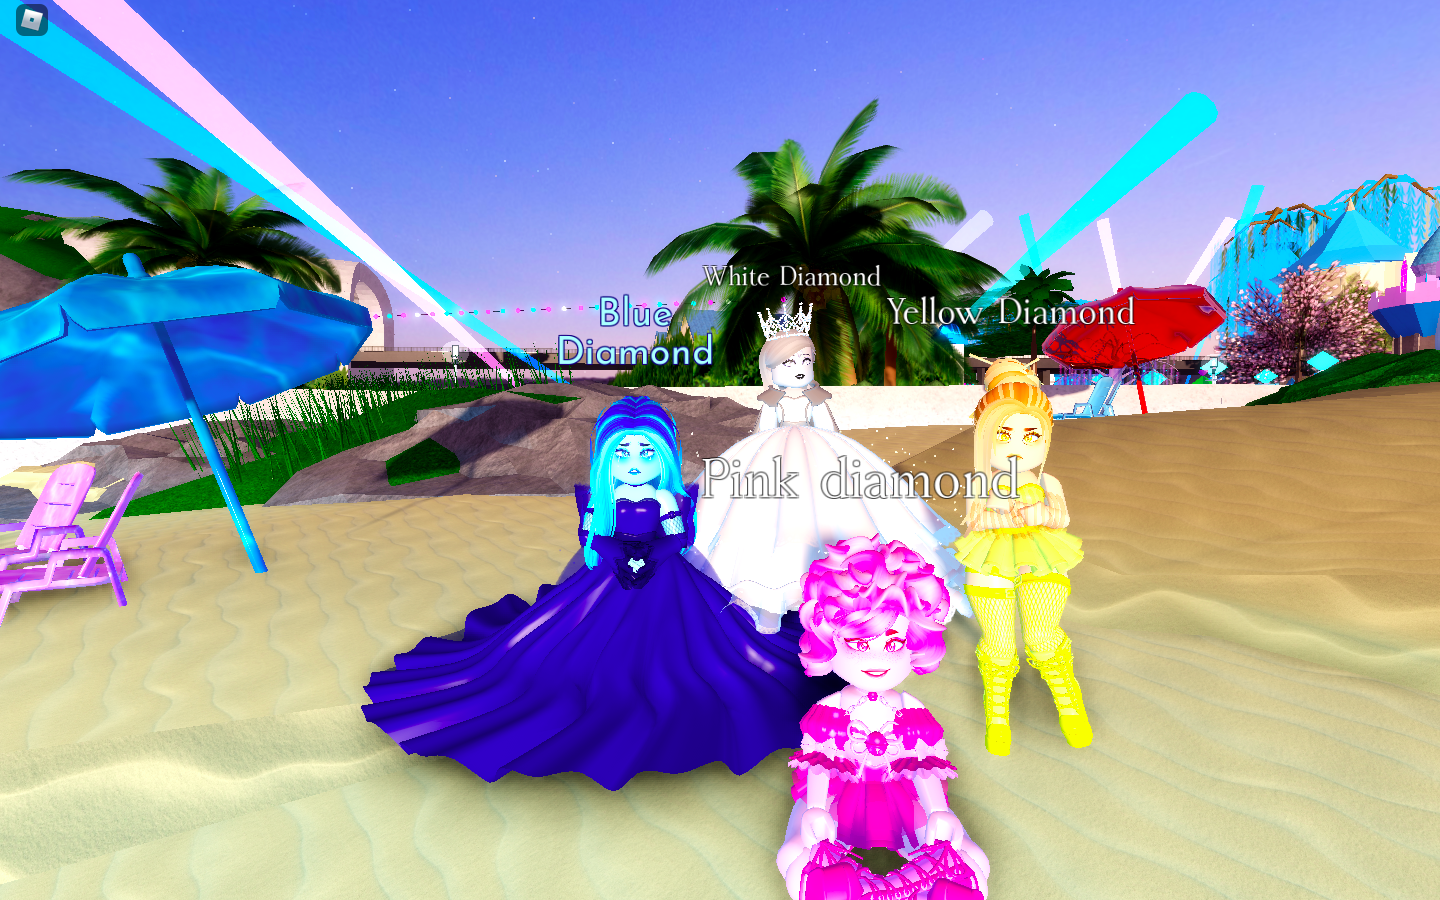 Discuss Everything About Royale High Wiki Fandom - how to get tons of diamonds in royale high fast no gamepasses roblox royale high school